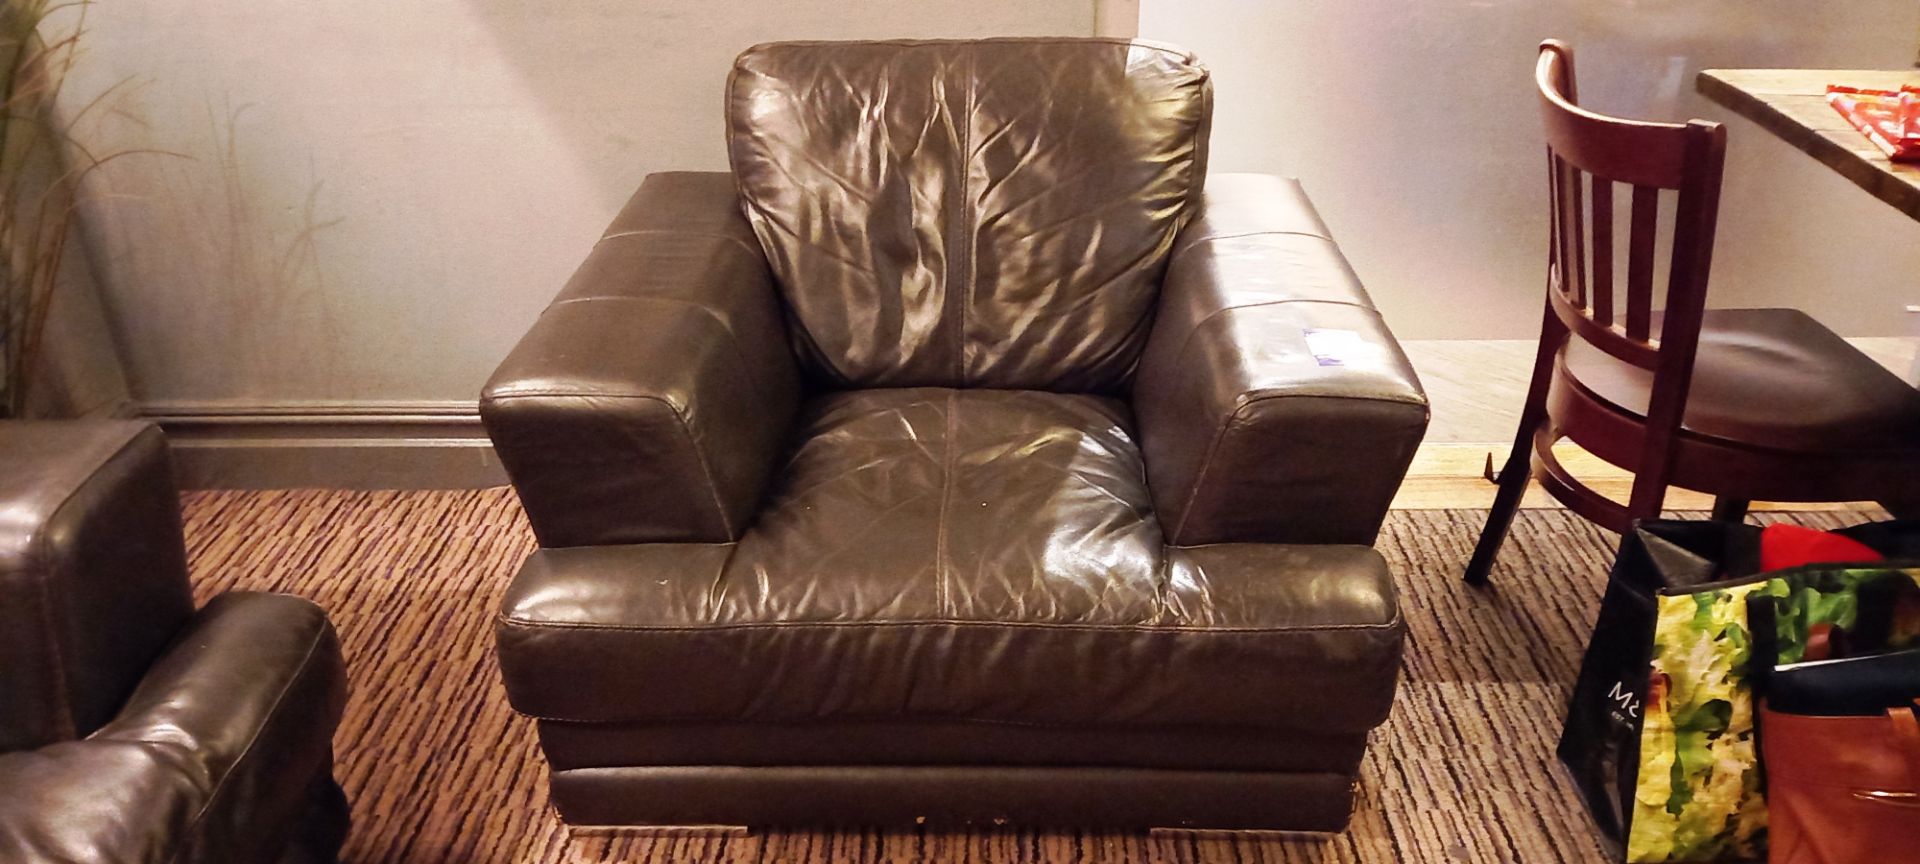 Two Piece Leather Sofa & Armchair Set - Image 3 of 3